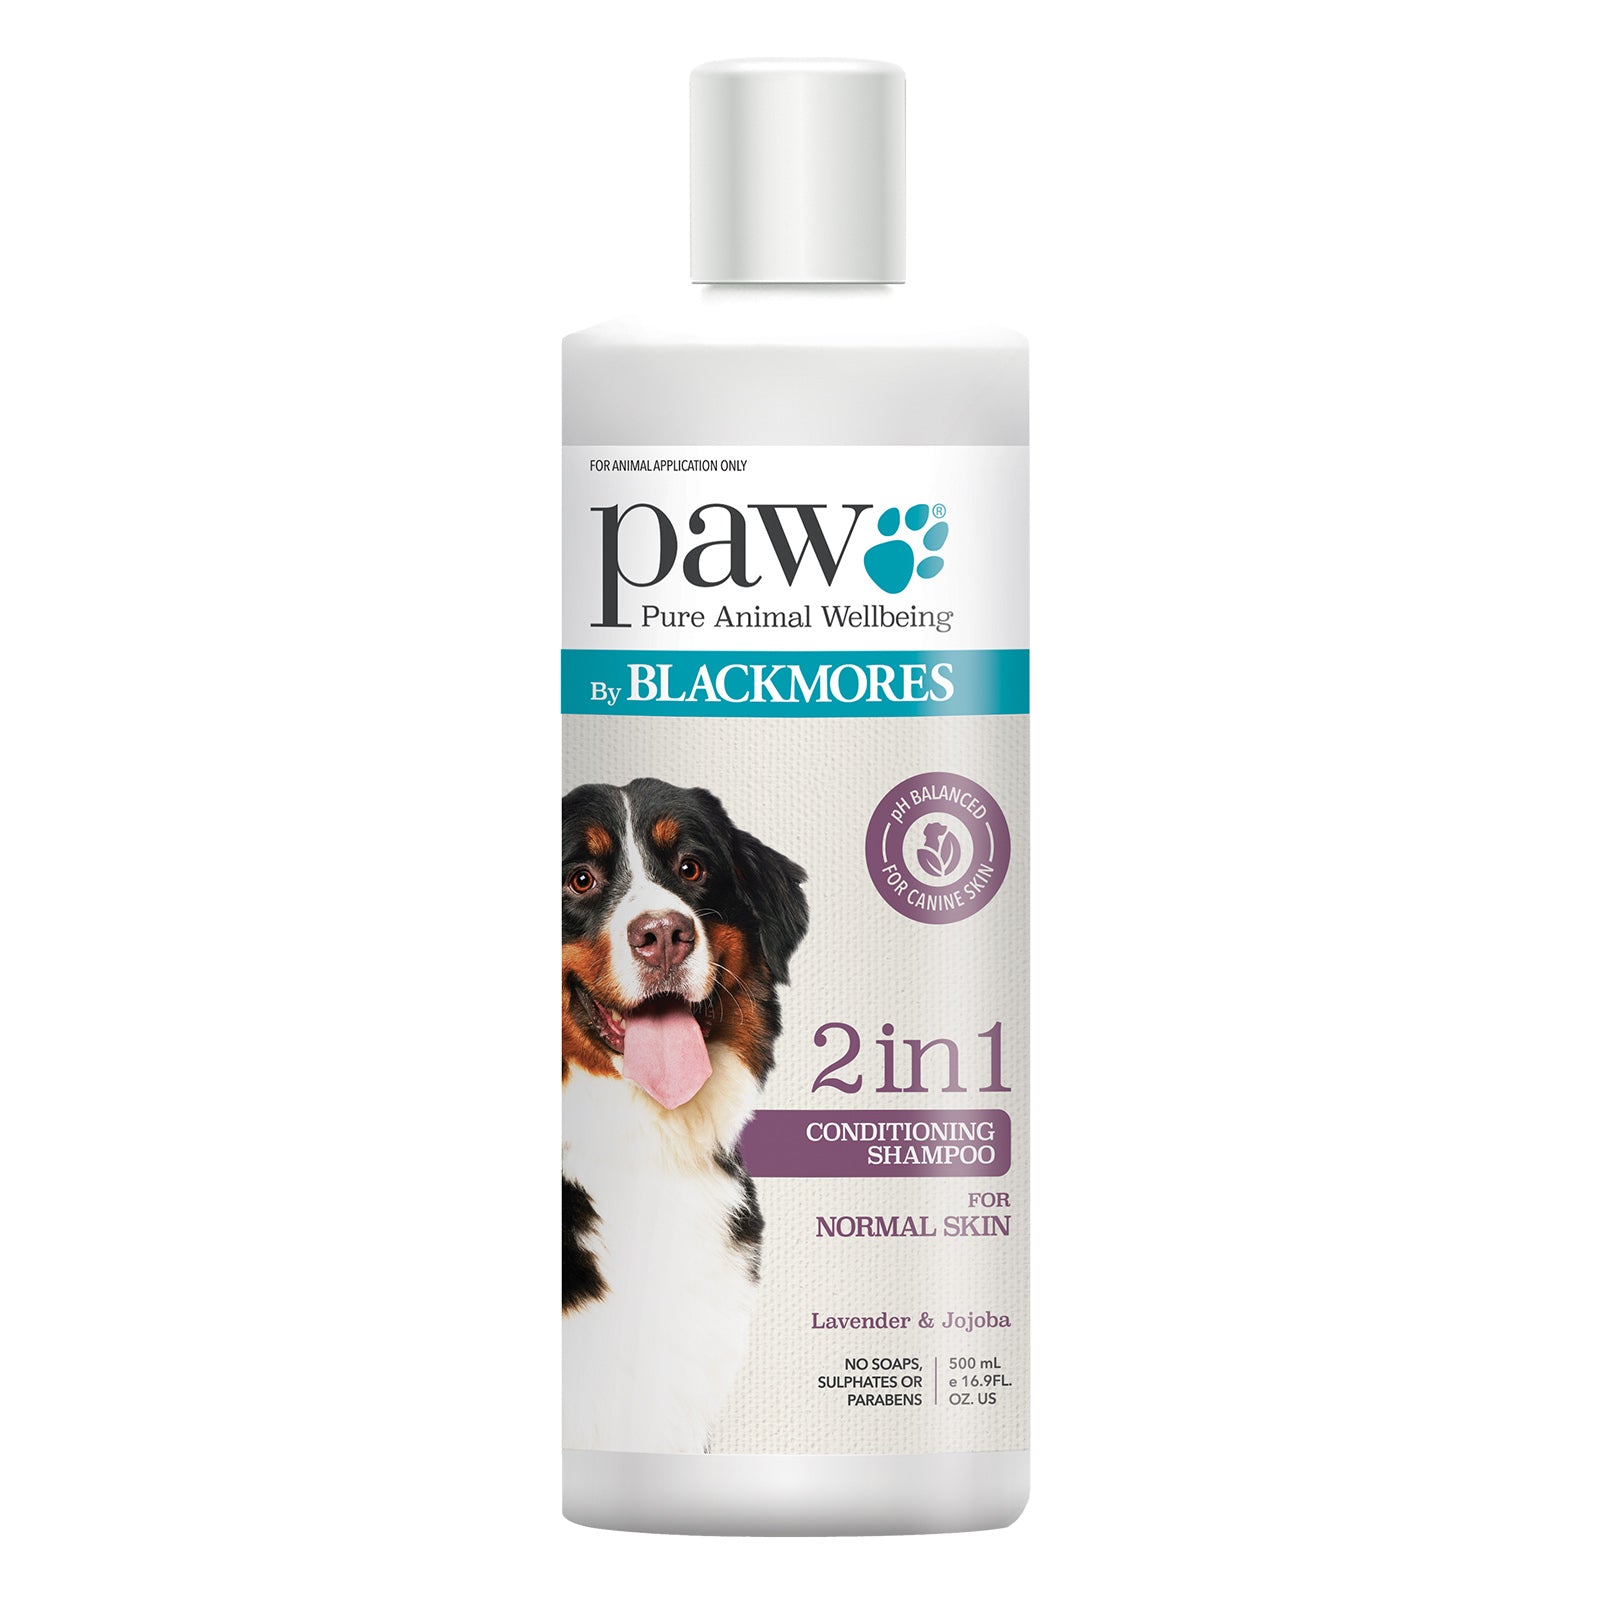 PAW BY BLACKMORES - 2-in-1 Conditioning Shampoo 500mL